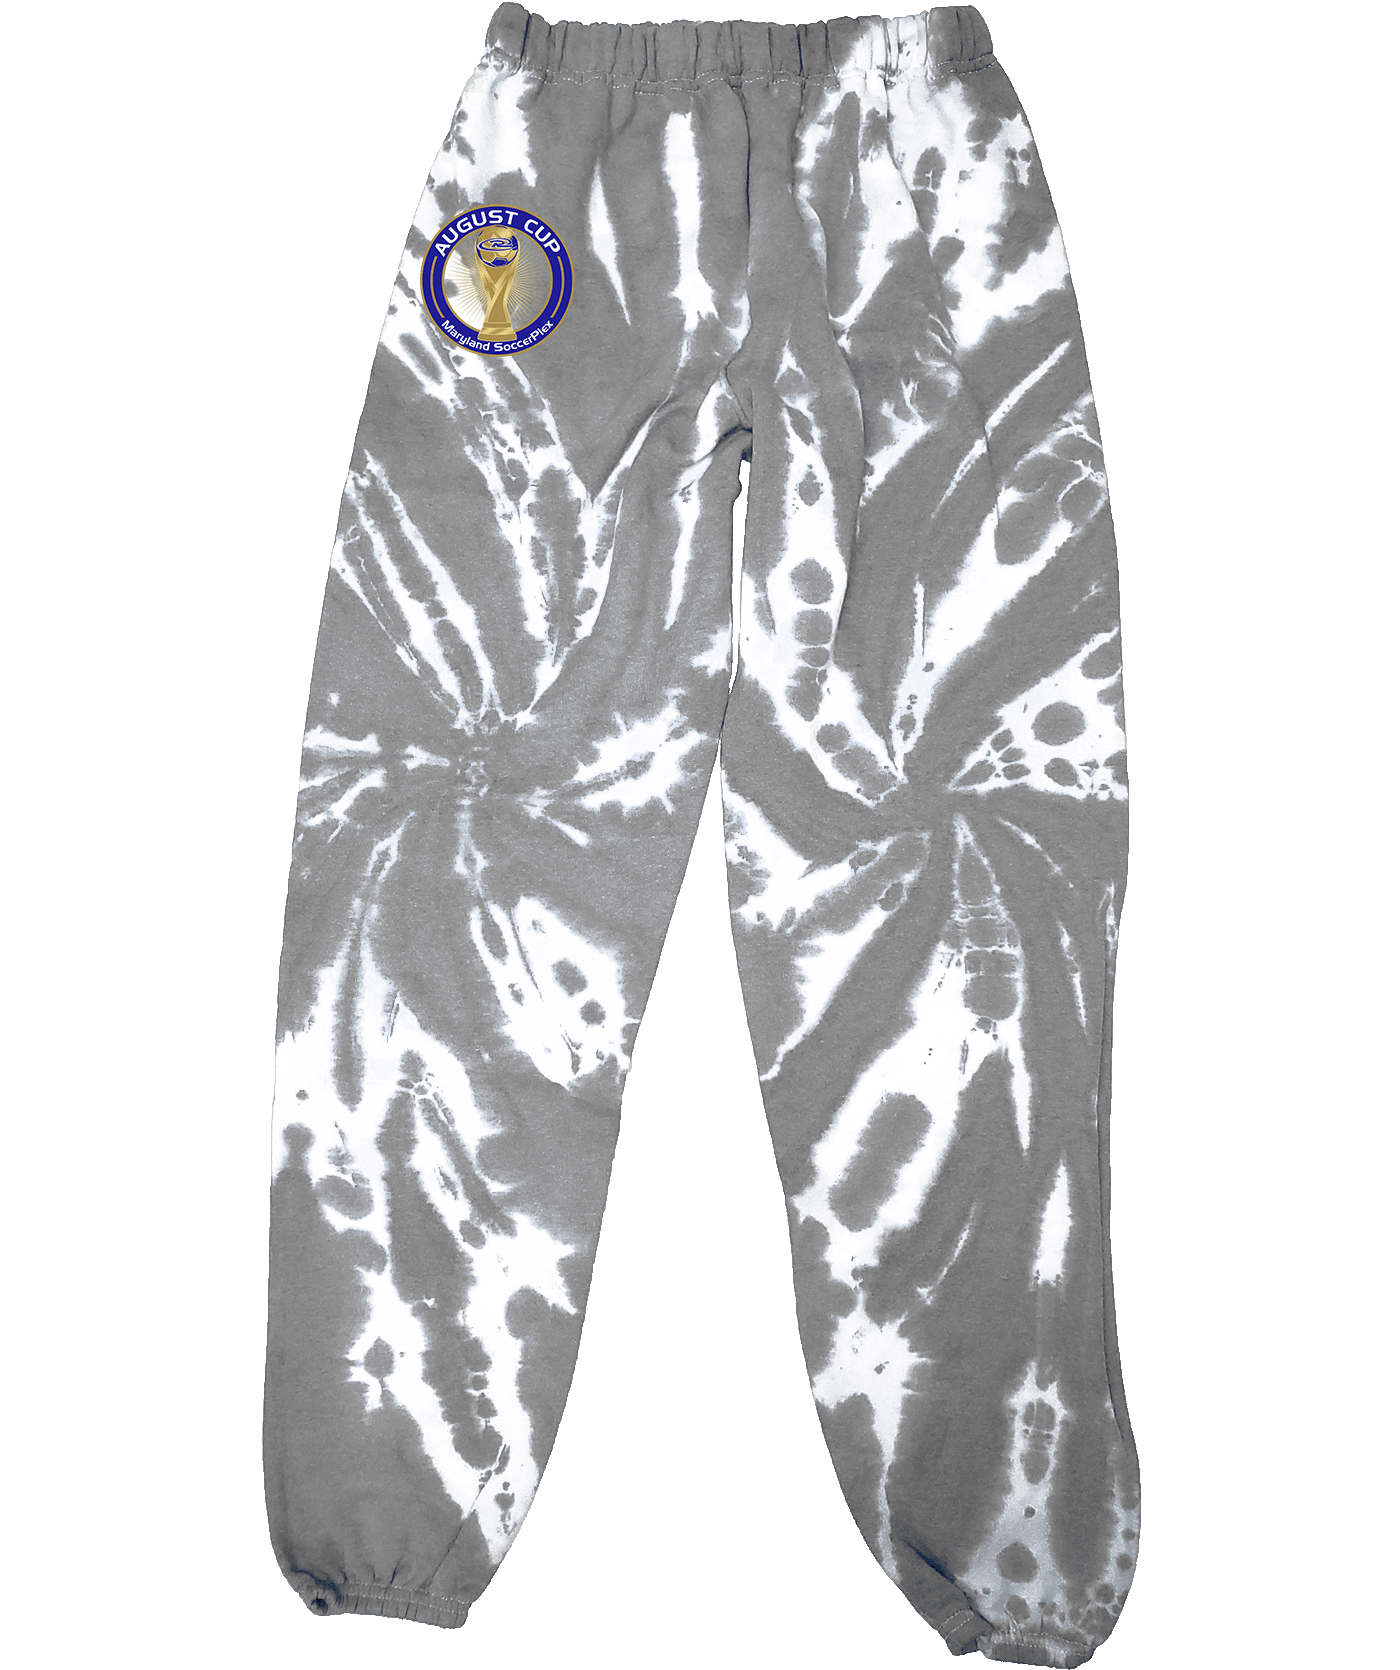 Sweat Pants - 2023 August Cup